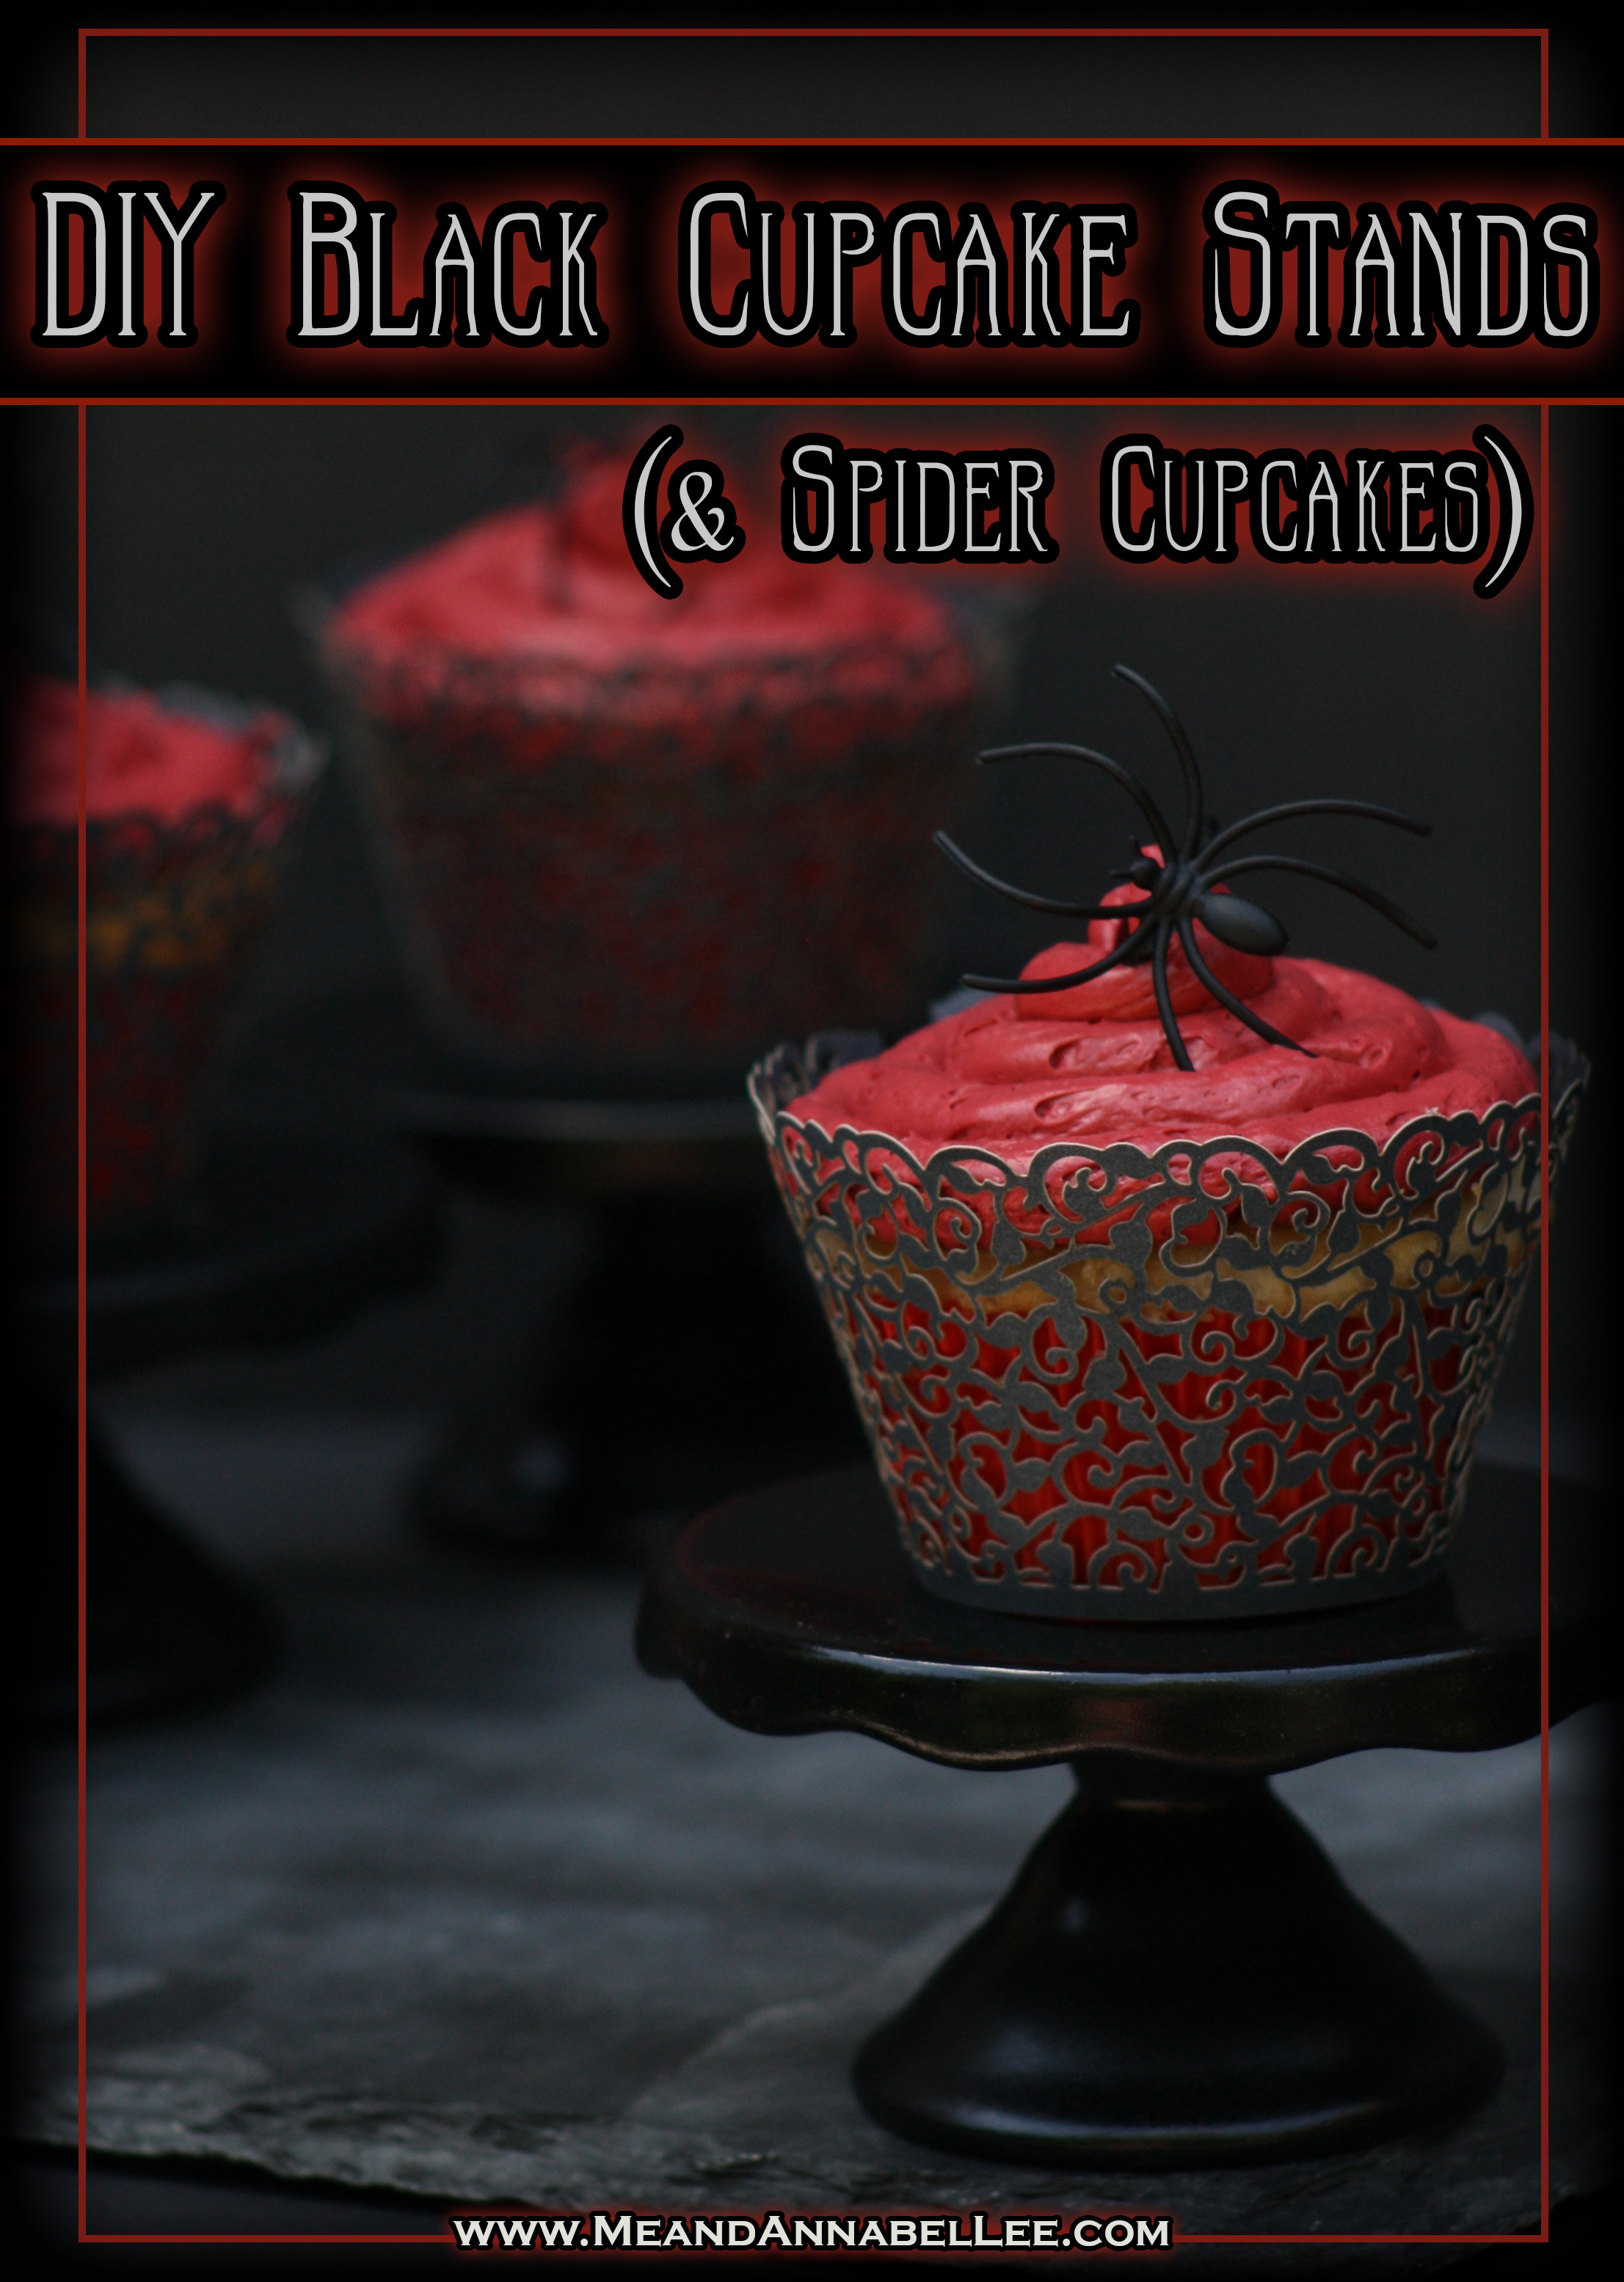 DIY Black Cupcake Stands | Black & Red Spider Cupcakes | Gothic Baking | Halloween Treats | Party Food | www.MeandAnnabelLee.com